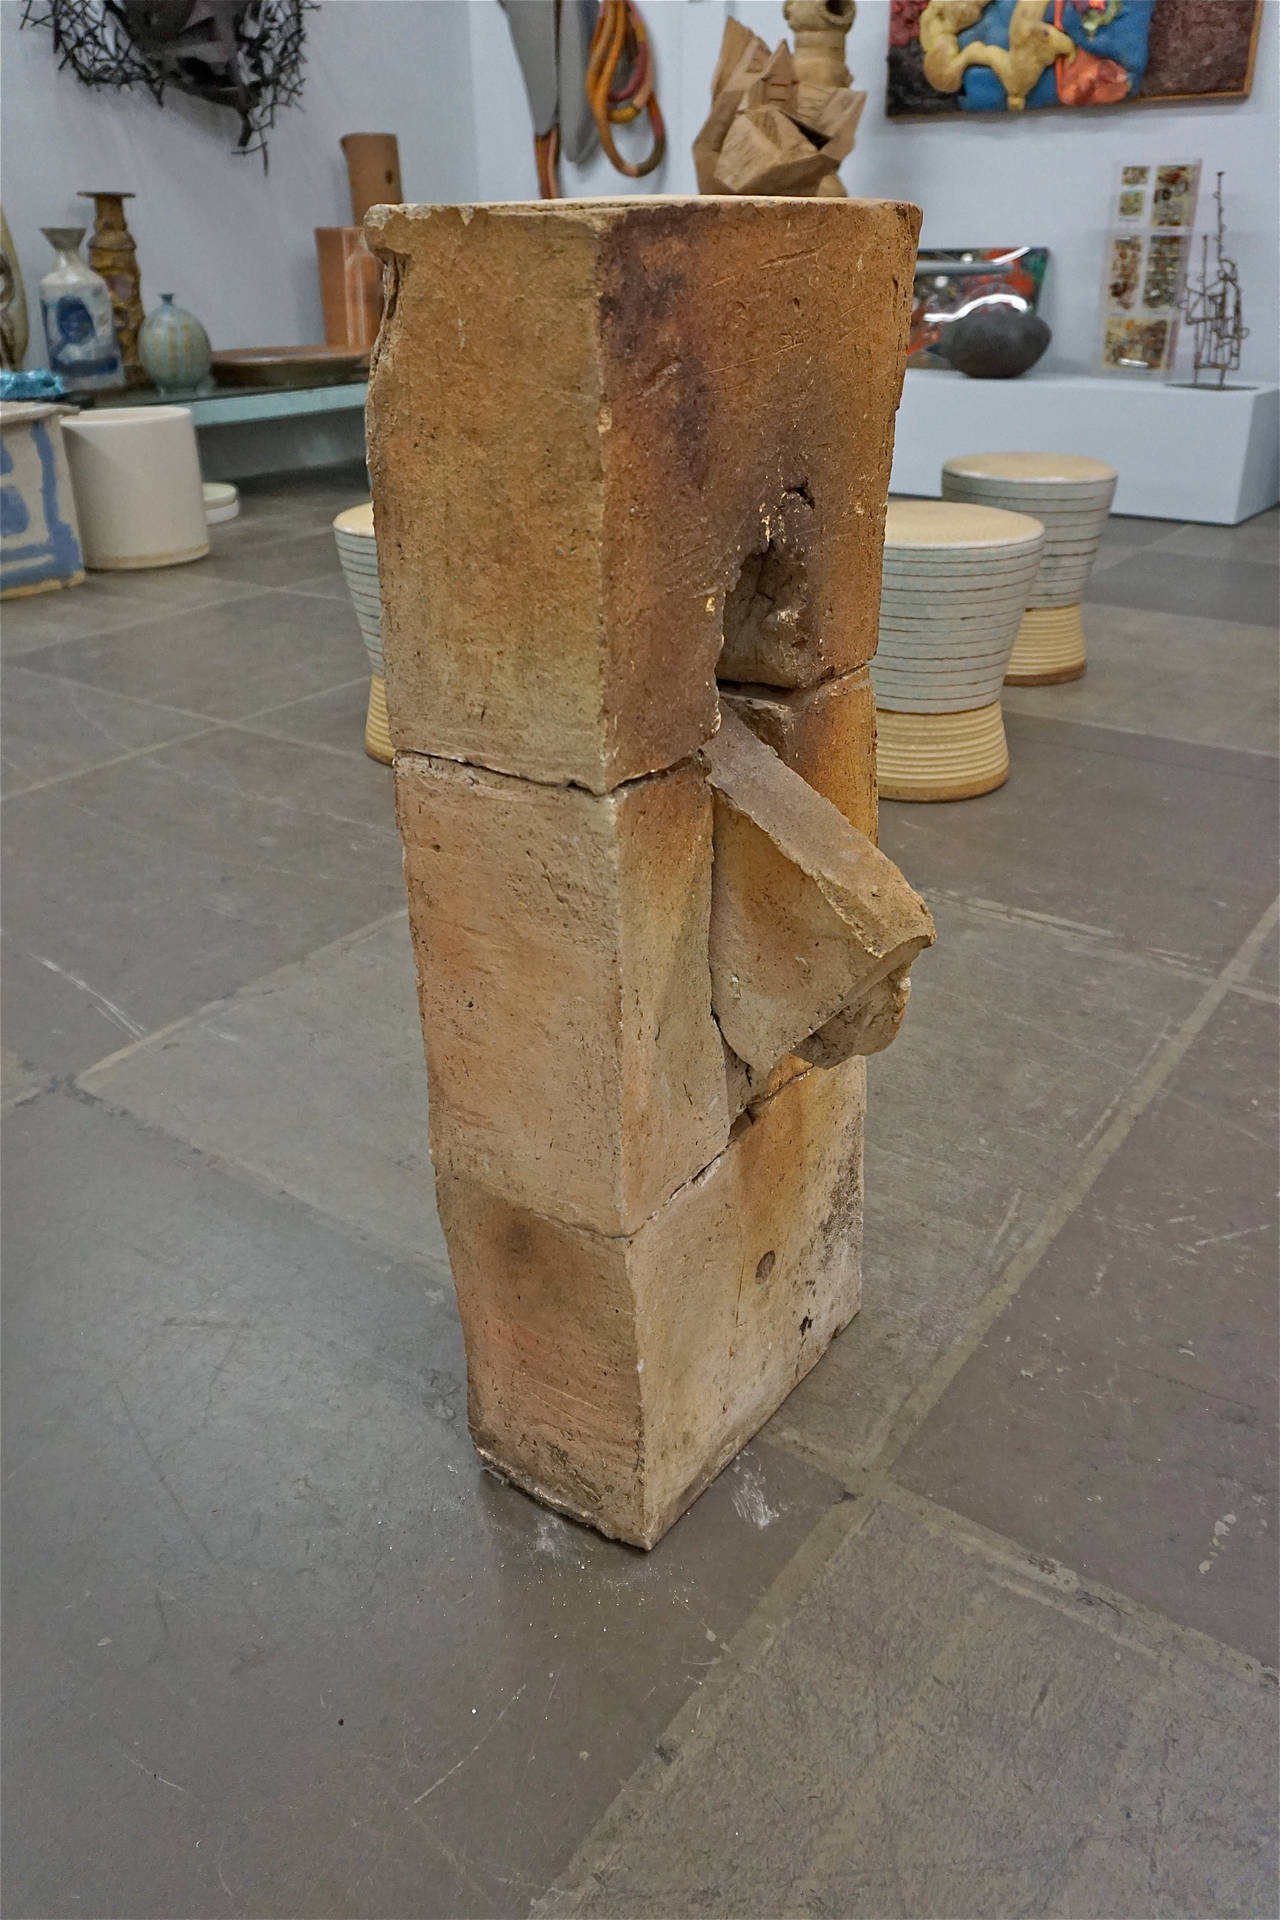 Dennis Gallagher was well known for his abstractions, often fabricating large clay structures that evoked fragments, memories or ruins of architecture. He was also a teacher at the San Francisco Art Institute and Mills College.

Numerous